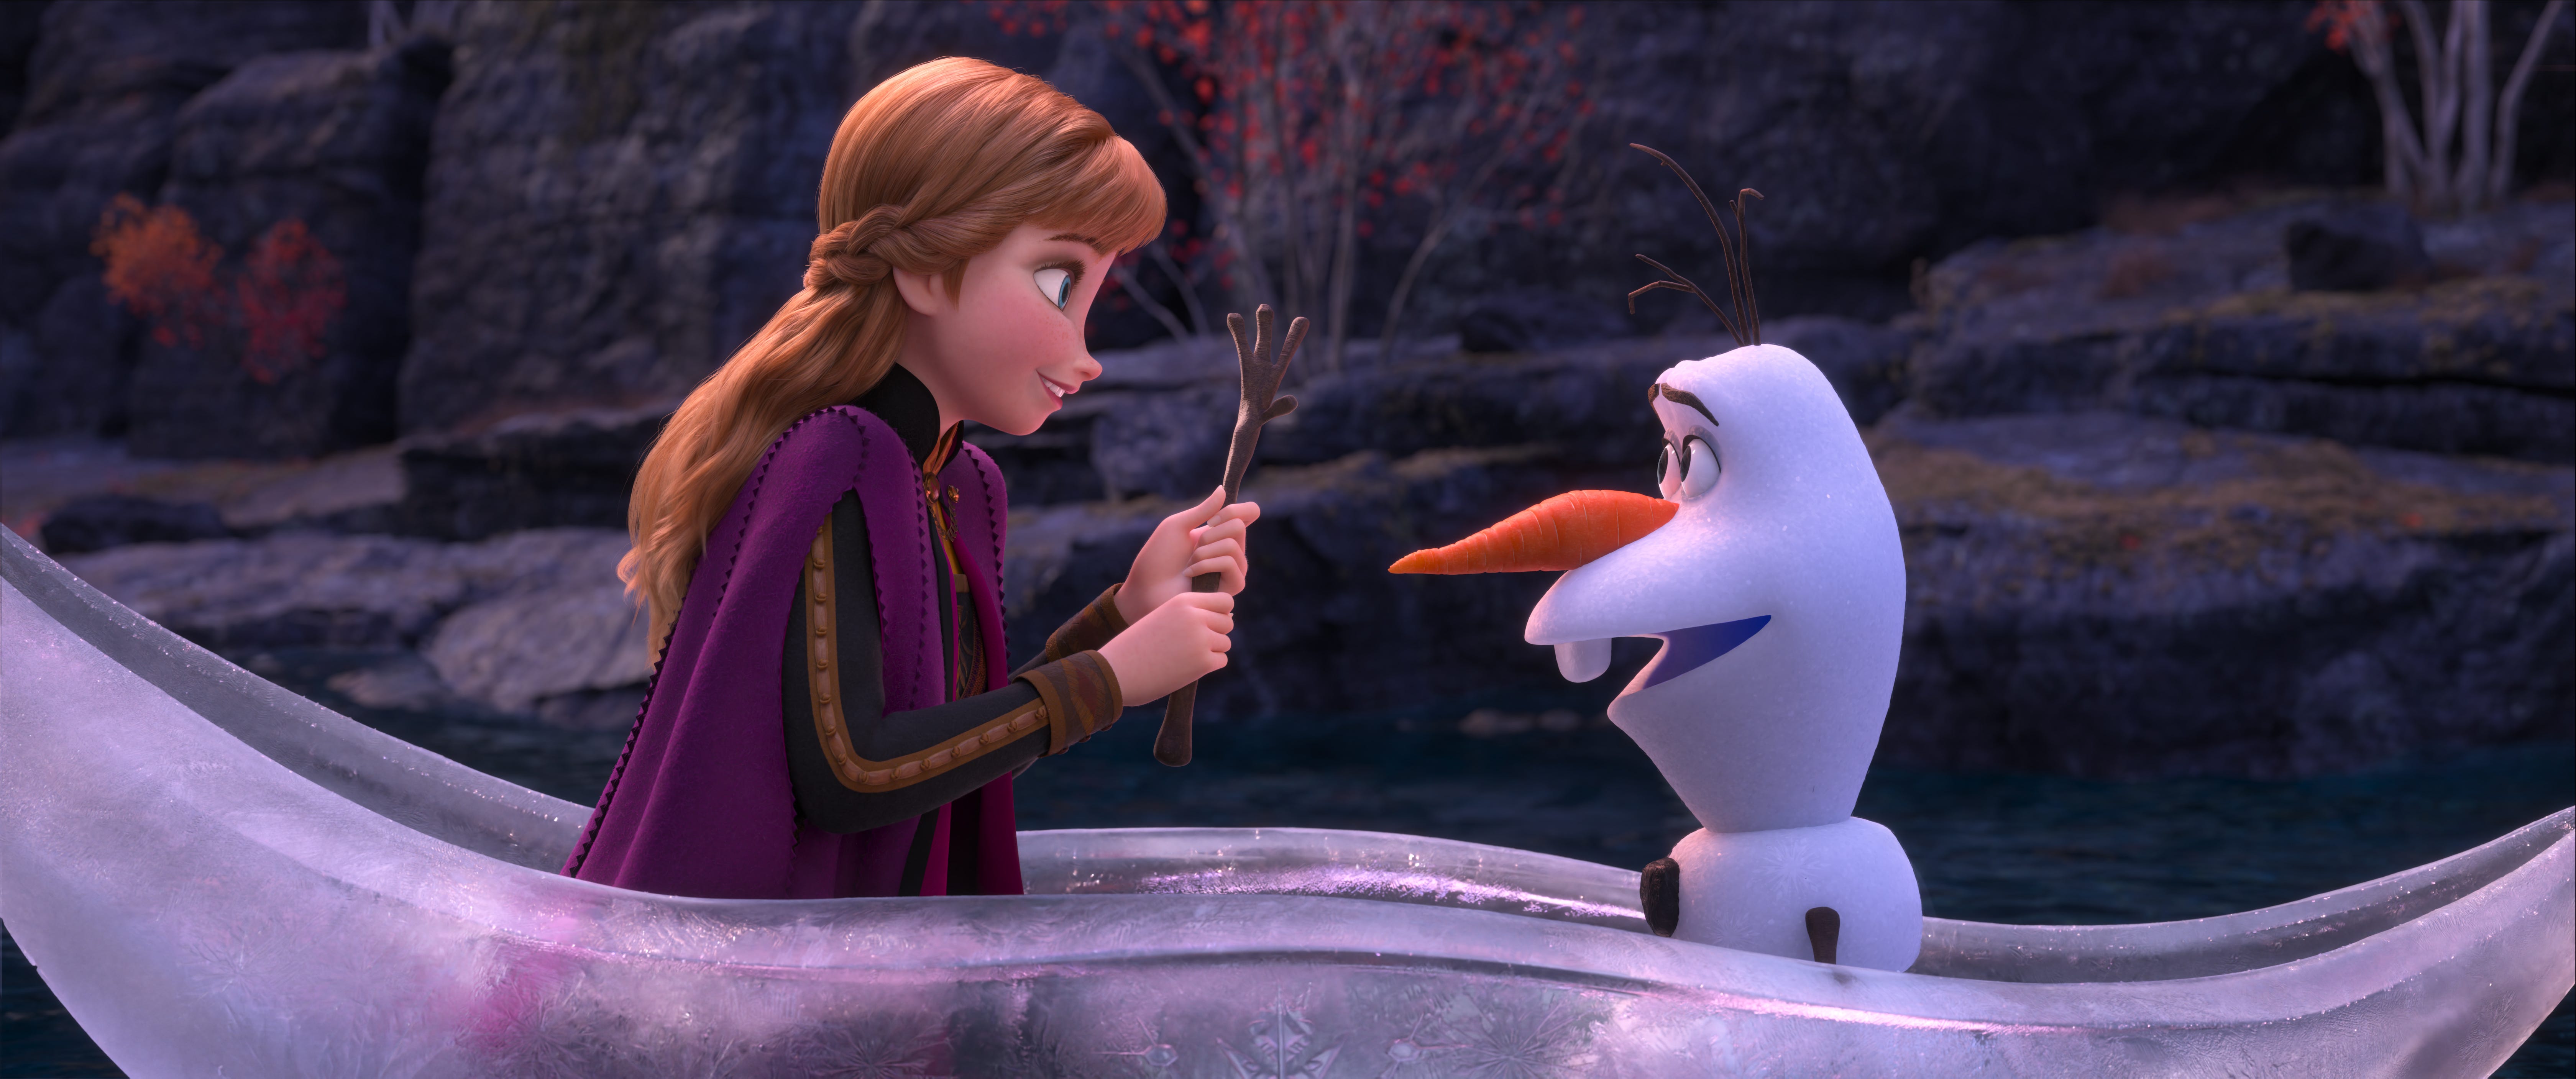 Anna and Olaf shared really sweet moments throughout the film. It culminated into a really sad moment in that cave!